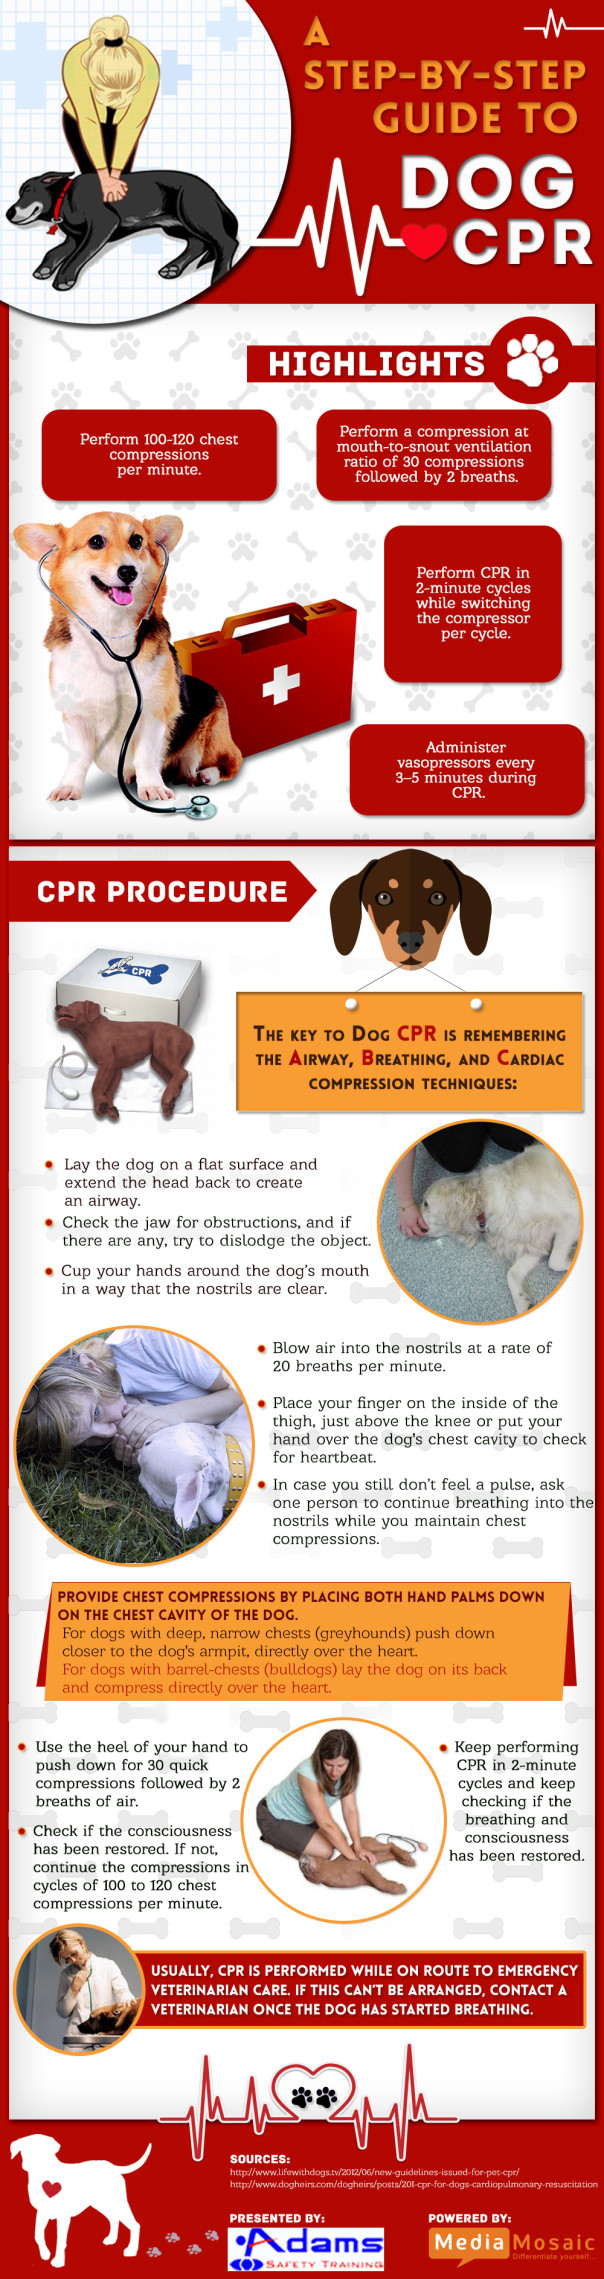 can a dog really perform cpr